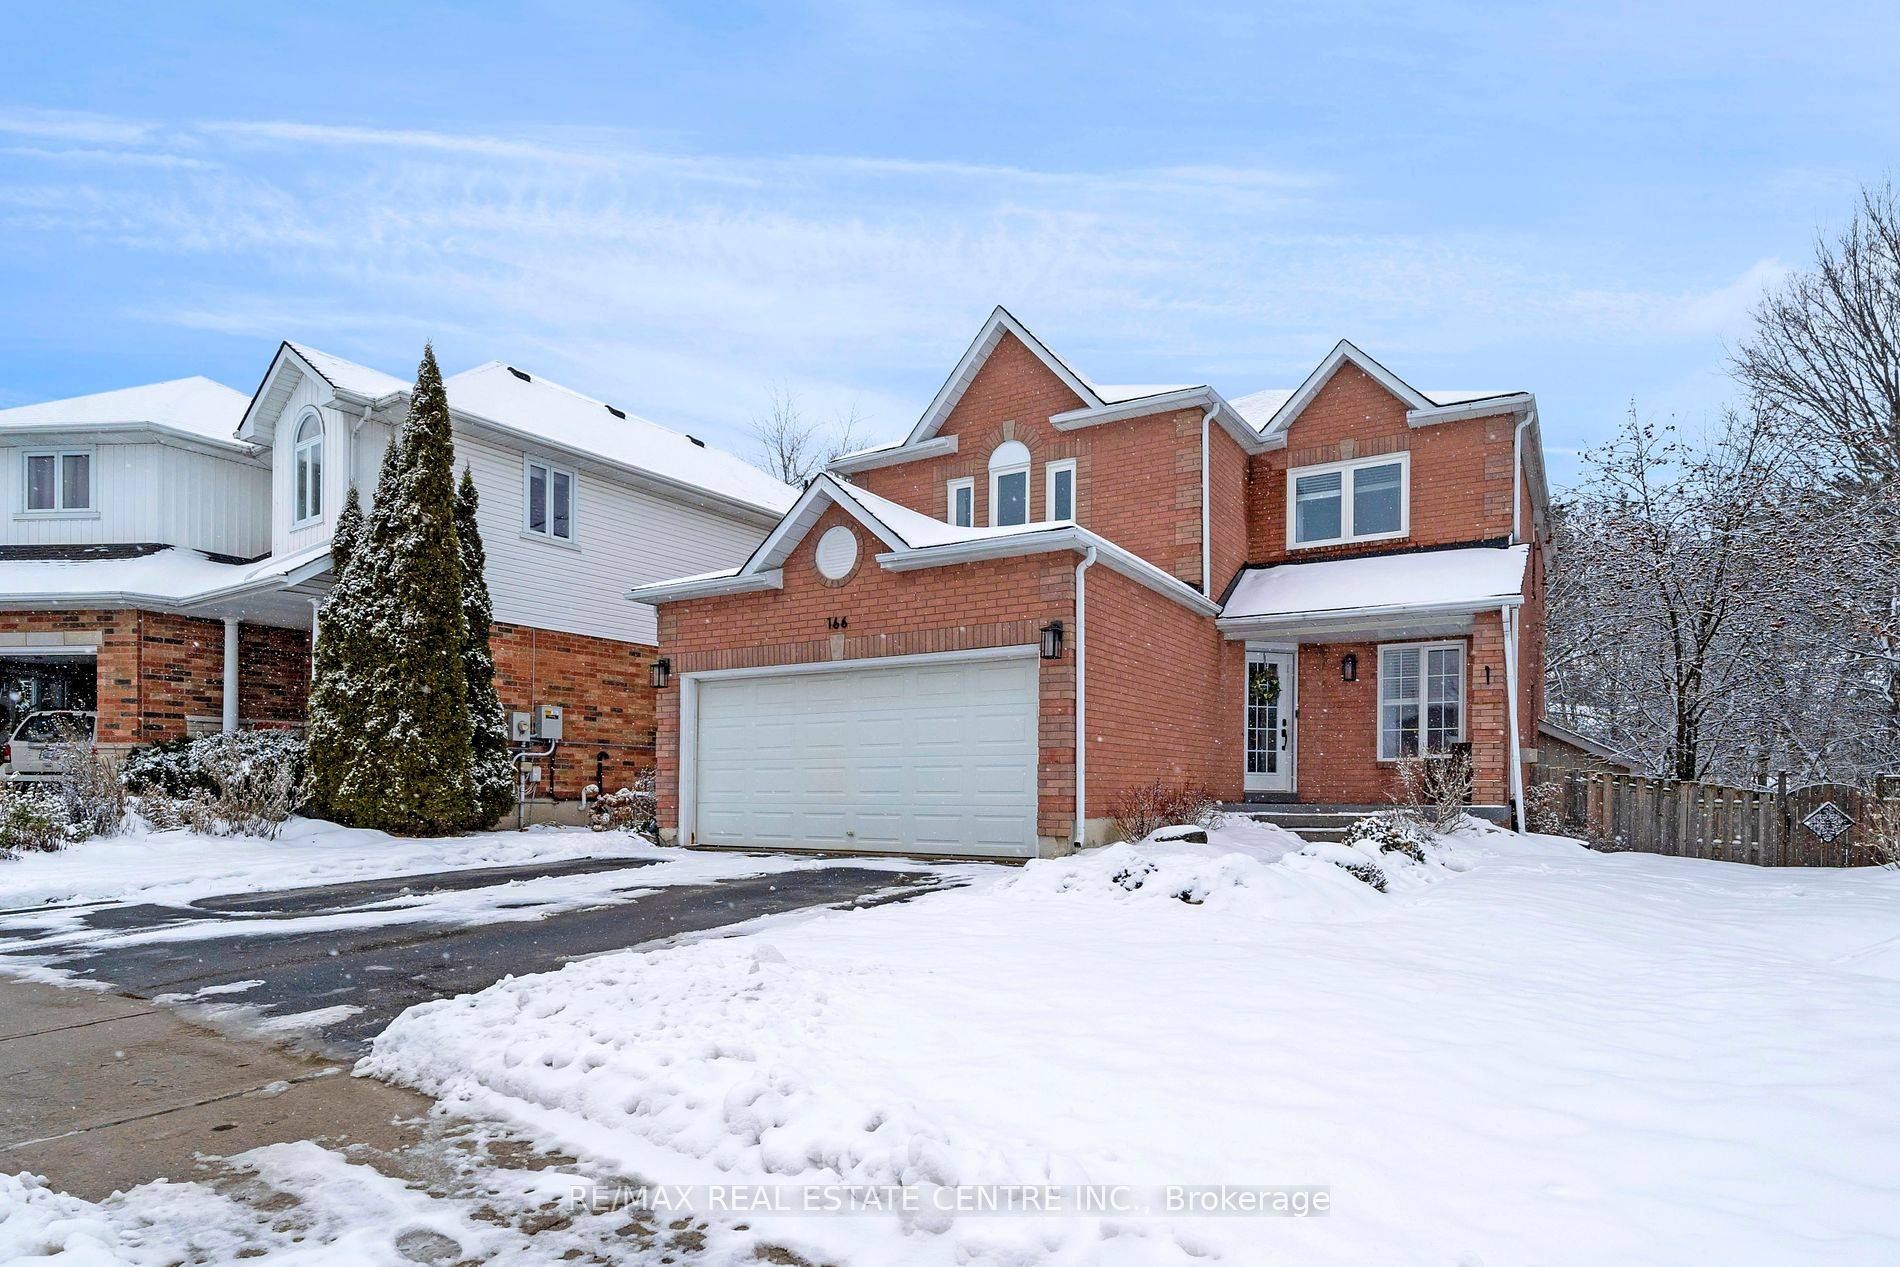 Welcome to 166 Lisa Marie Drive, a substantial 4 1 bedroom, 4 bath home in Orangeville's coveted north end.